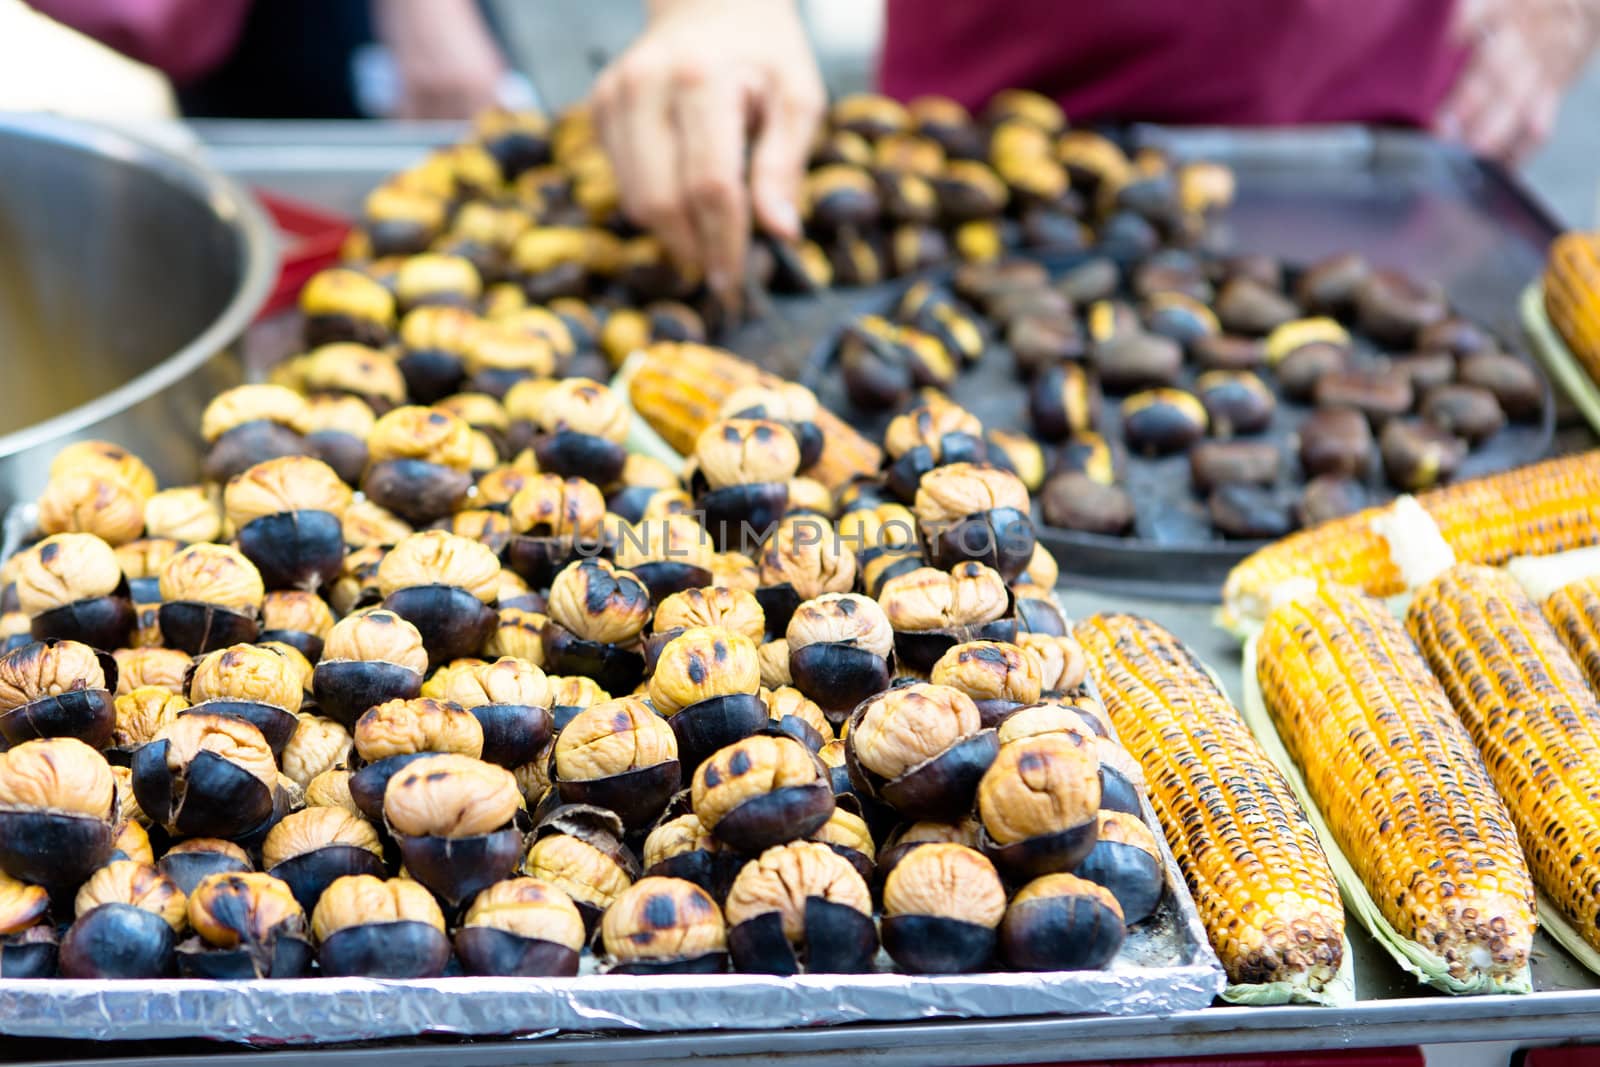 Roasted chestnuts and chorns are on sale, ready to eat.